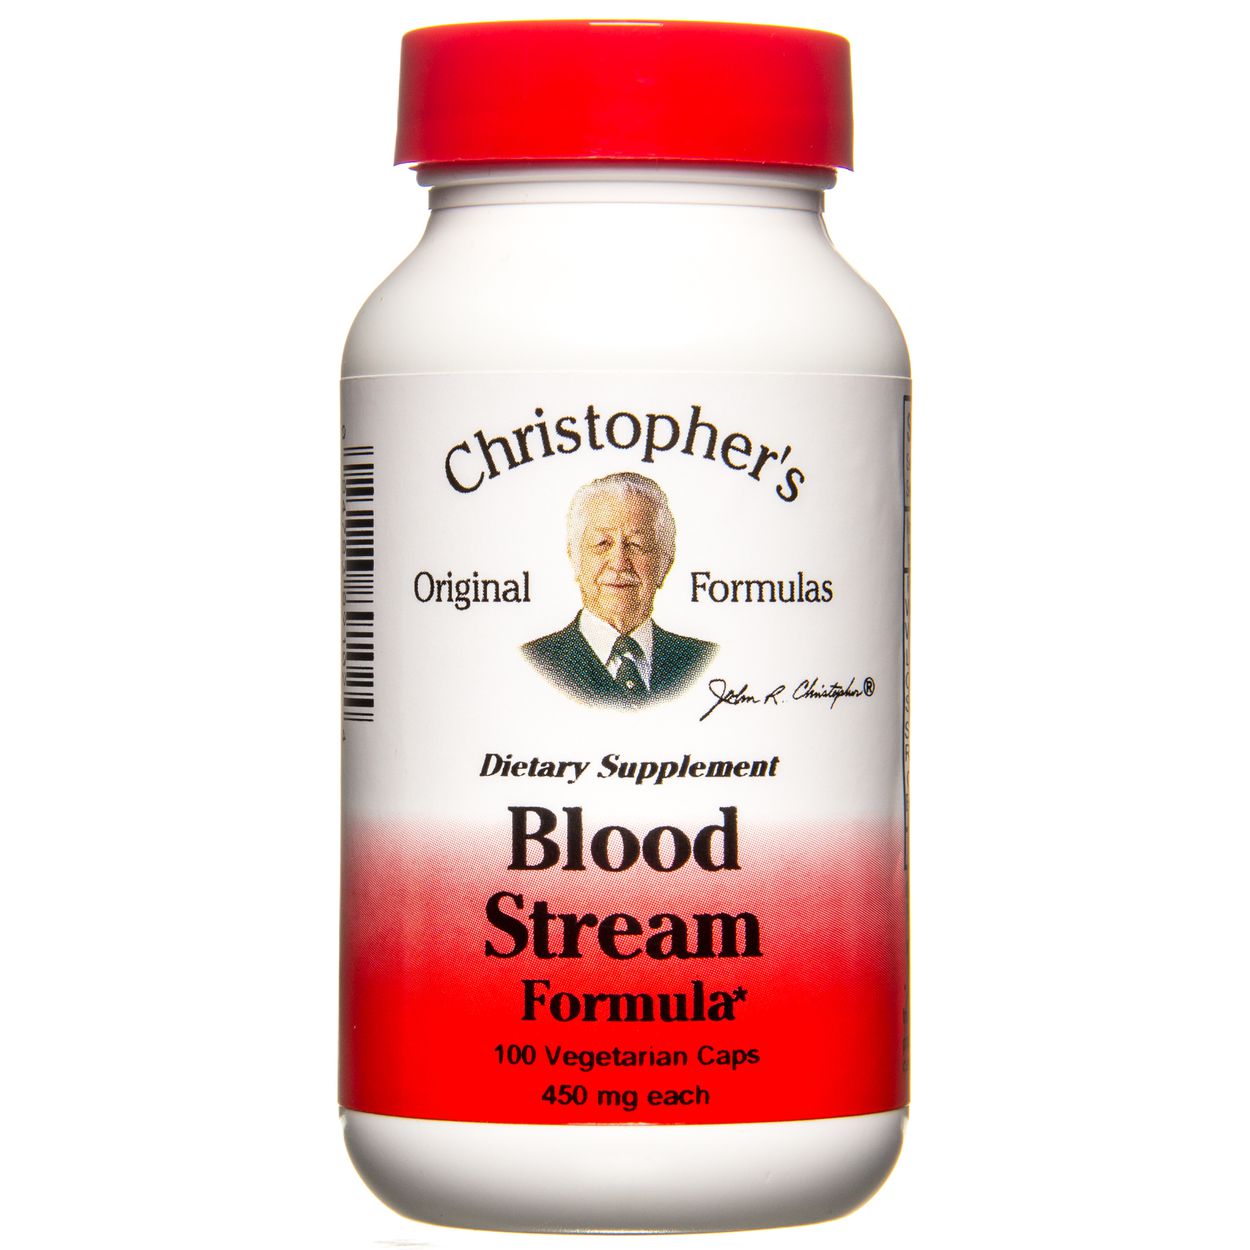 Product Listing Image for Dr Christophers Blood Stream Formula Capsules